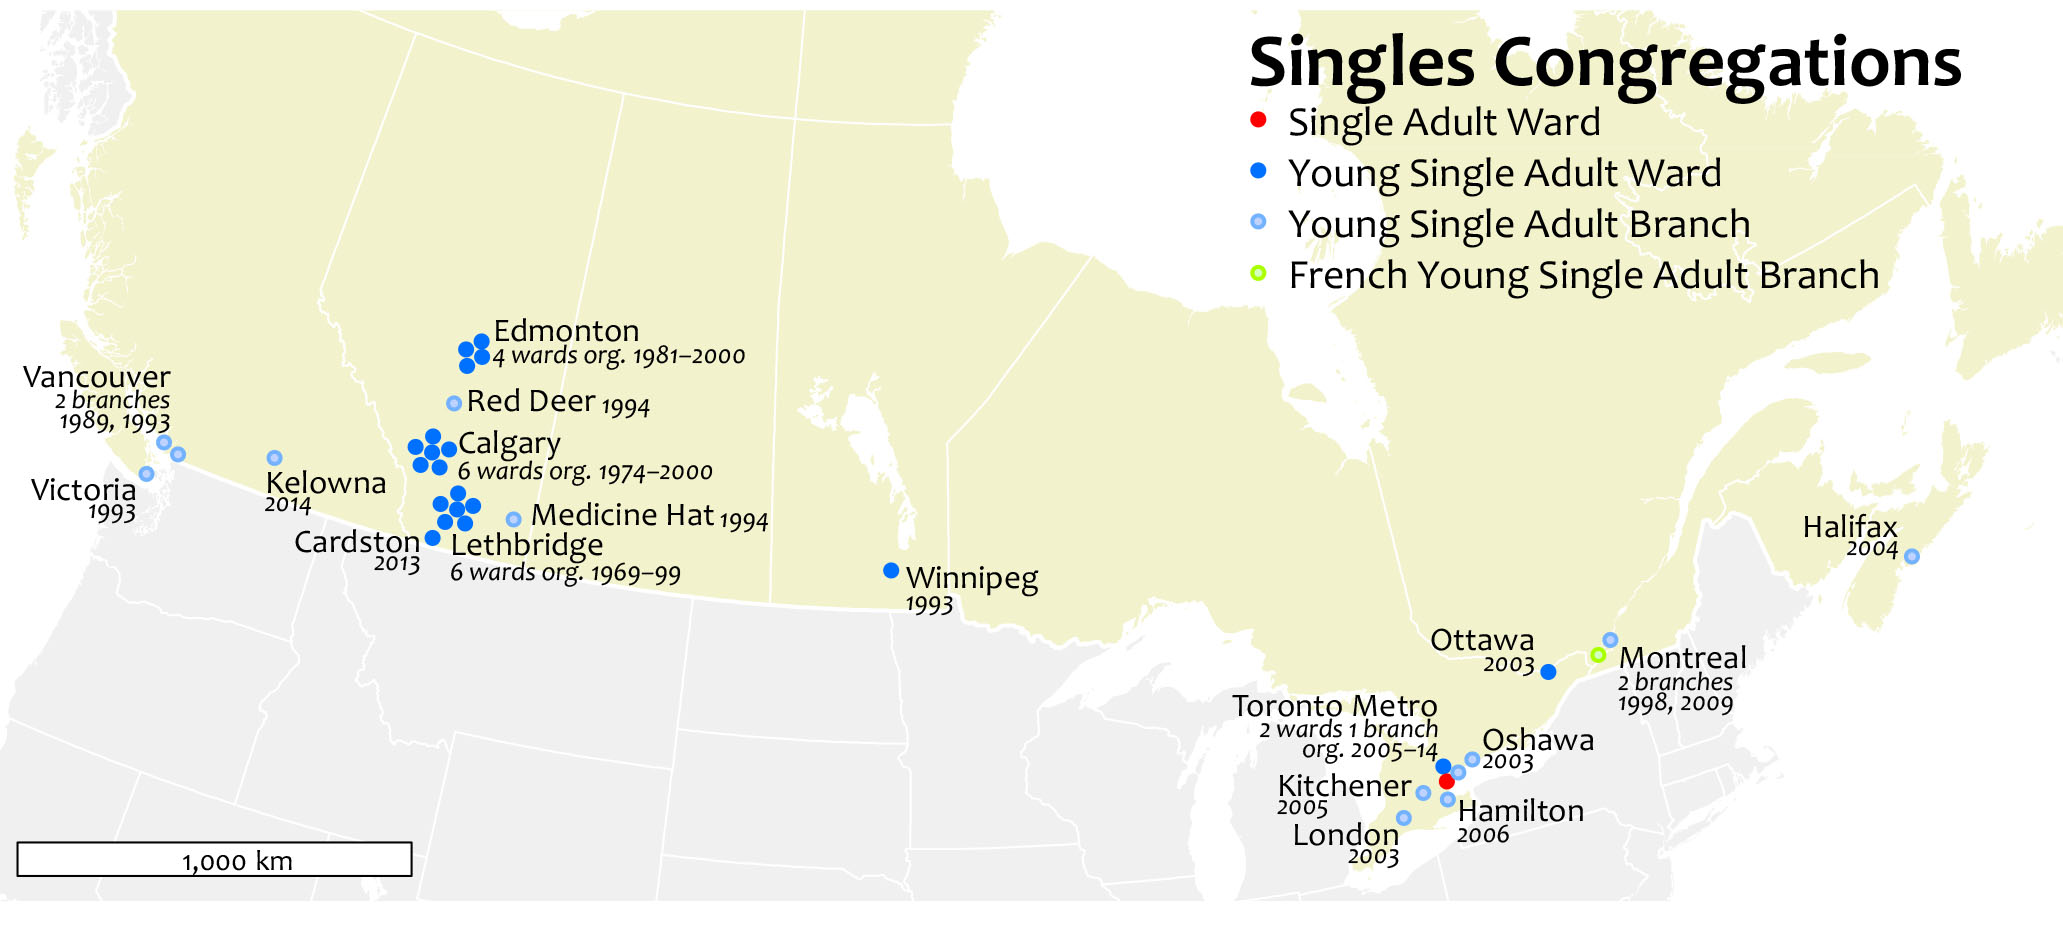 map of Canadian Singles congregations